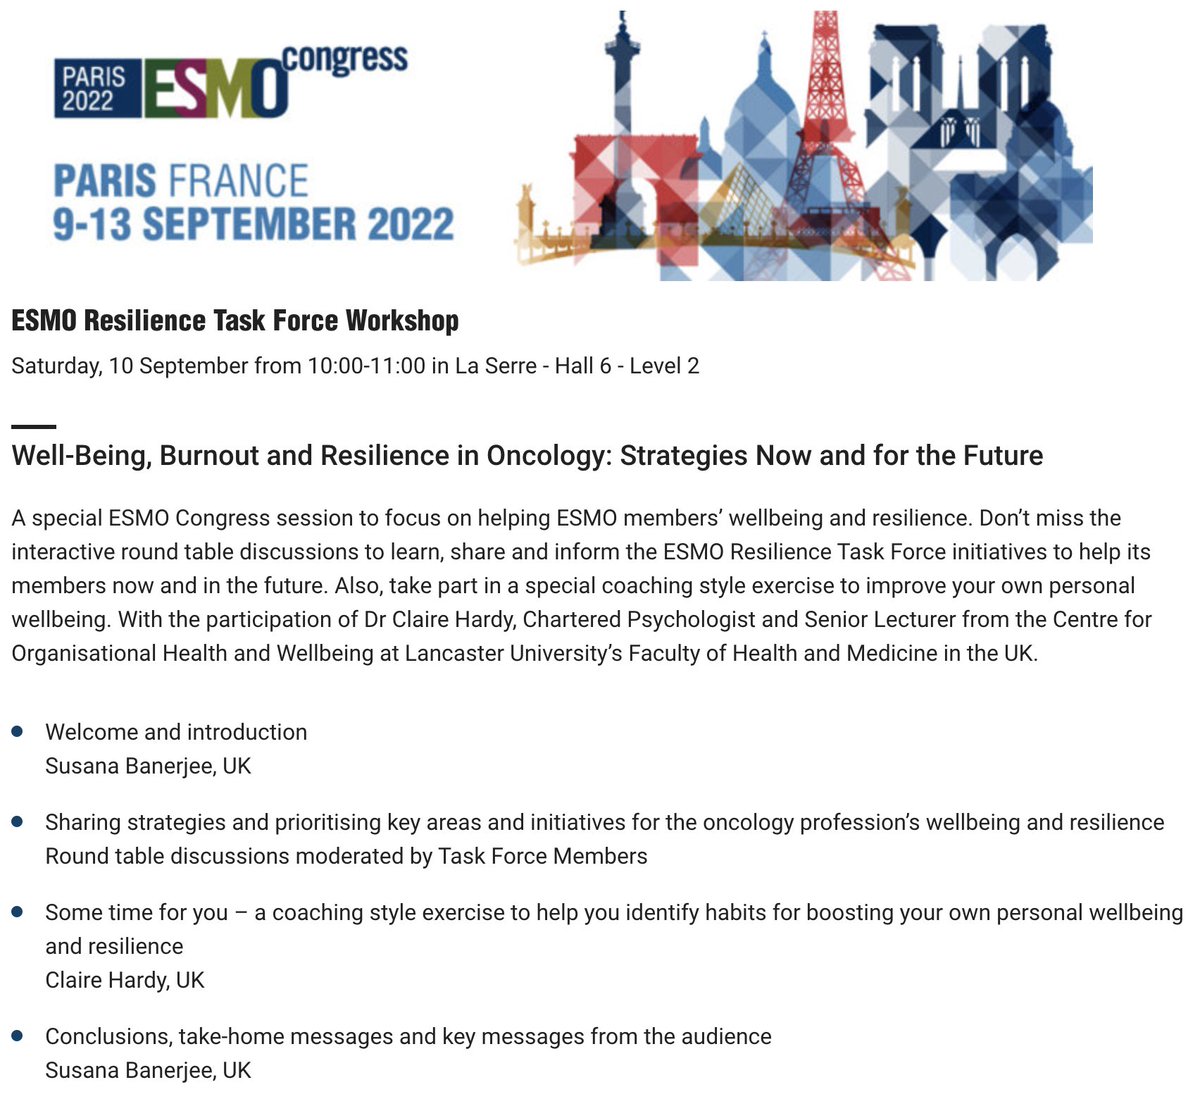 🗓️ Preparing your schedule for #ESMO22? 💥 Don't miss our Special Session on 'Wellbeing, burnout & resilience in oncology'! Join us: 🎯 Explore key strategies & new initiatives for wellbeing 🎯 Hands-on coaching-style exercise to boost your personal wellbeing & resilience